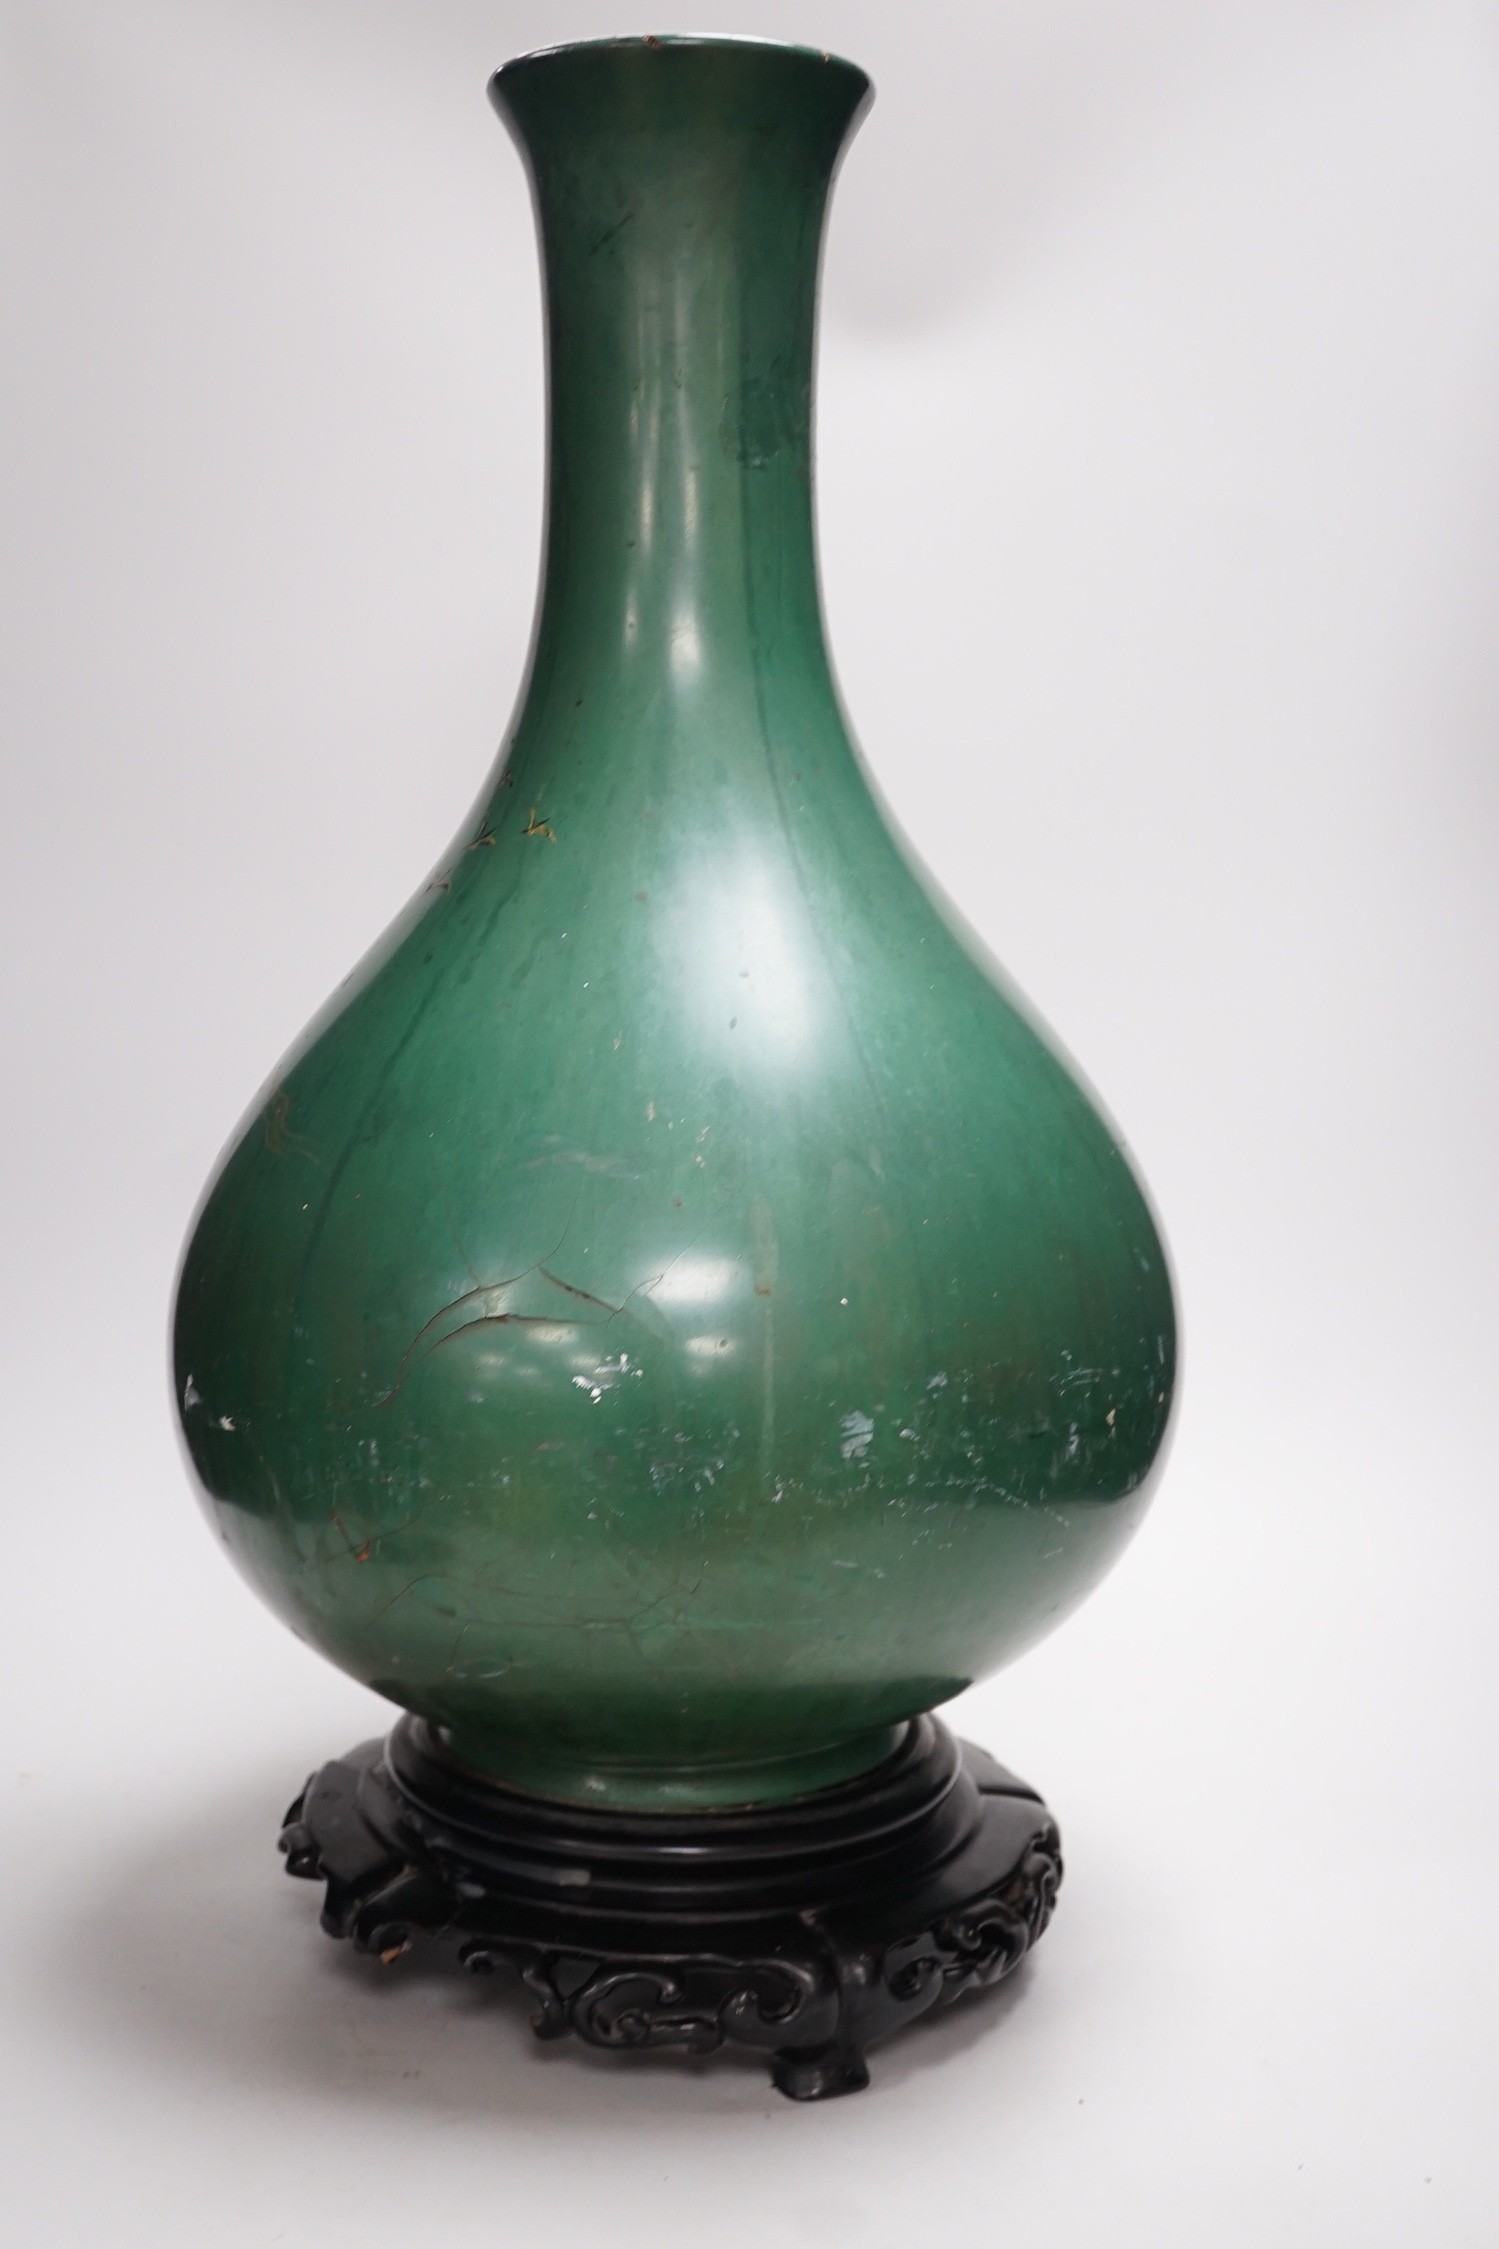 A large Chinese Fuzhou lacquer green ground vase and stand, early 20th century, 54 cm high